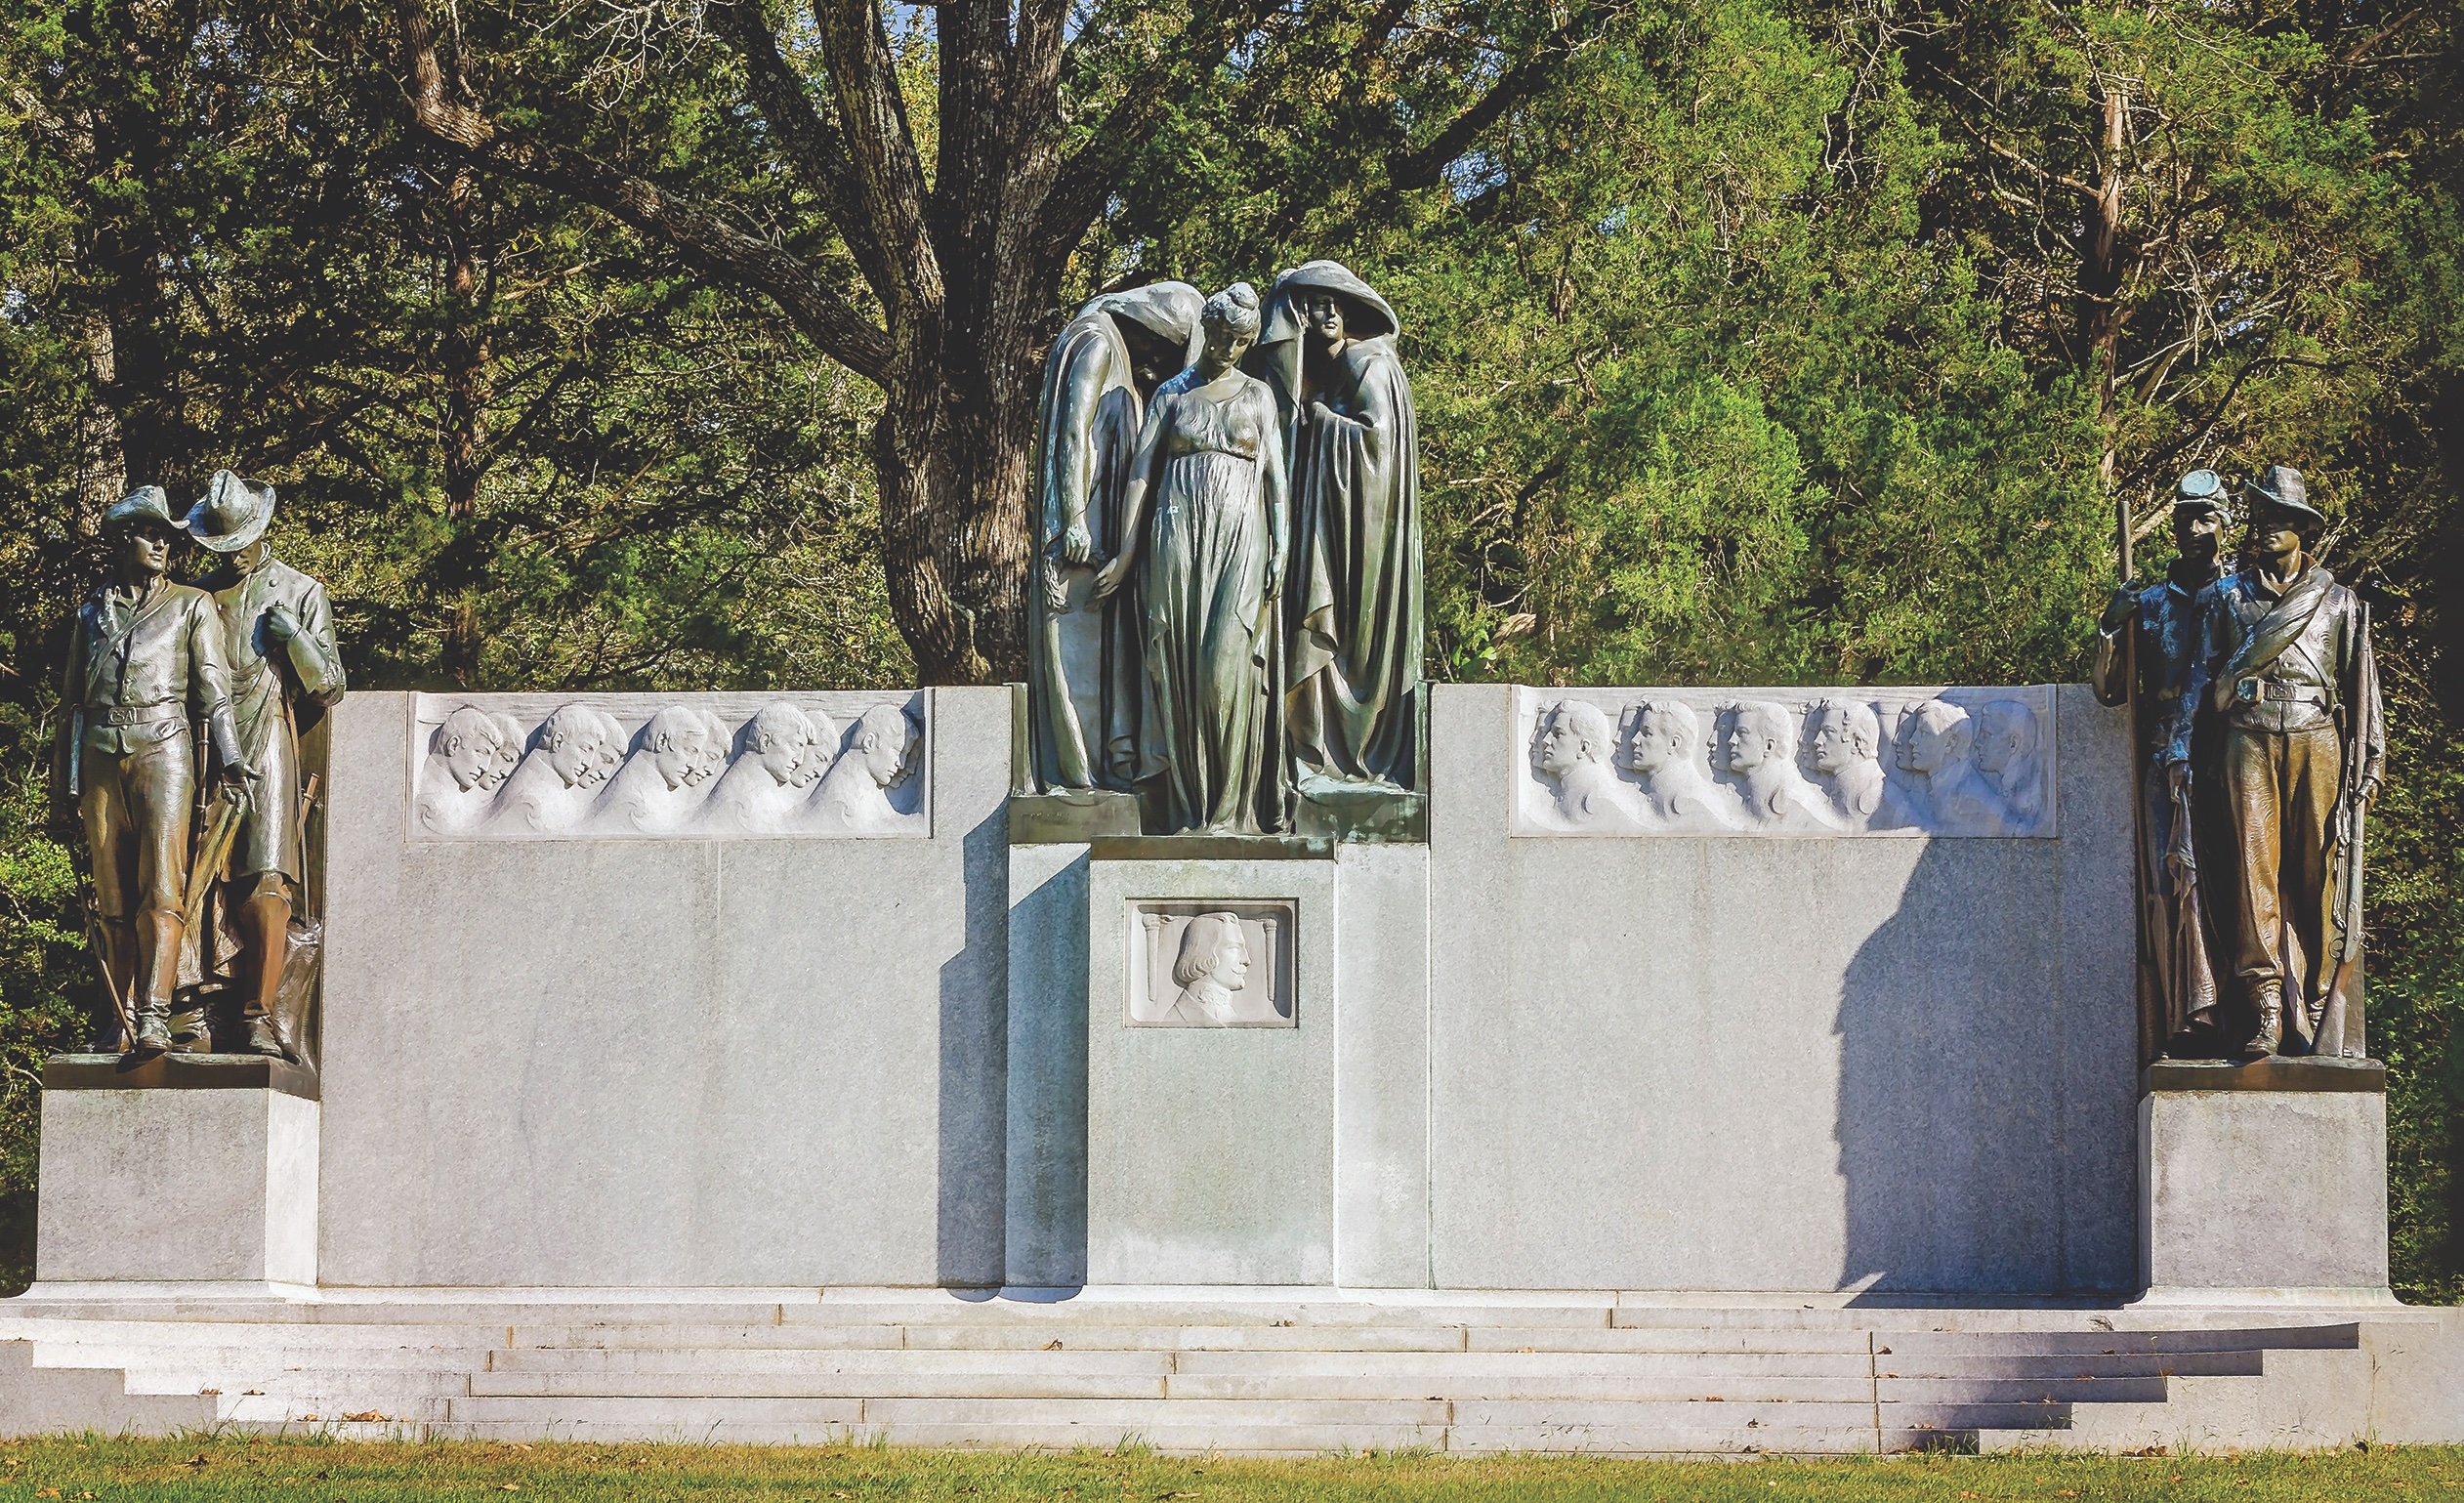 Erected by the UDC in 1917, this prominent Shiloh memorial features “Lost Cause” themes that both Johnston’s death and nightfall led to the Rebels’ irreversible loss. In the center are figures of the South, Death, and Night, with a somber South handing Death a victory wreath. (Alamy Stock Photo)